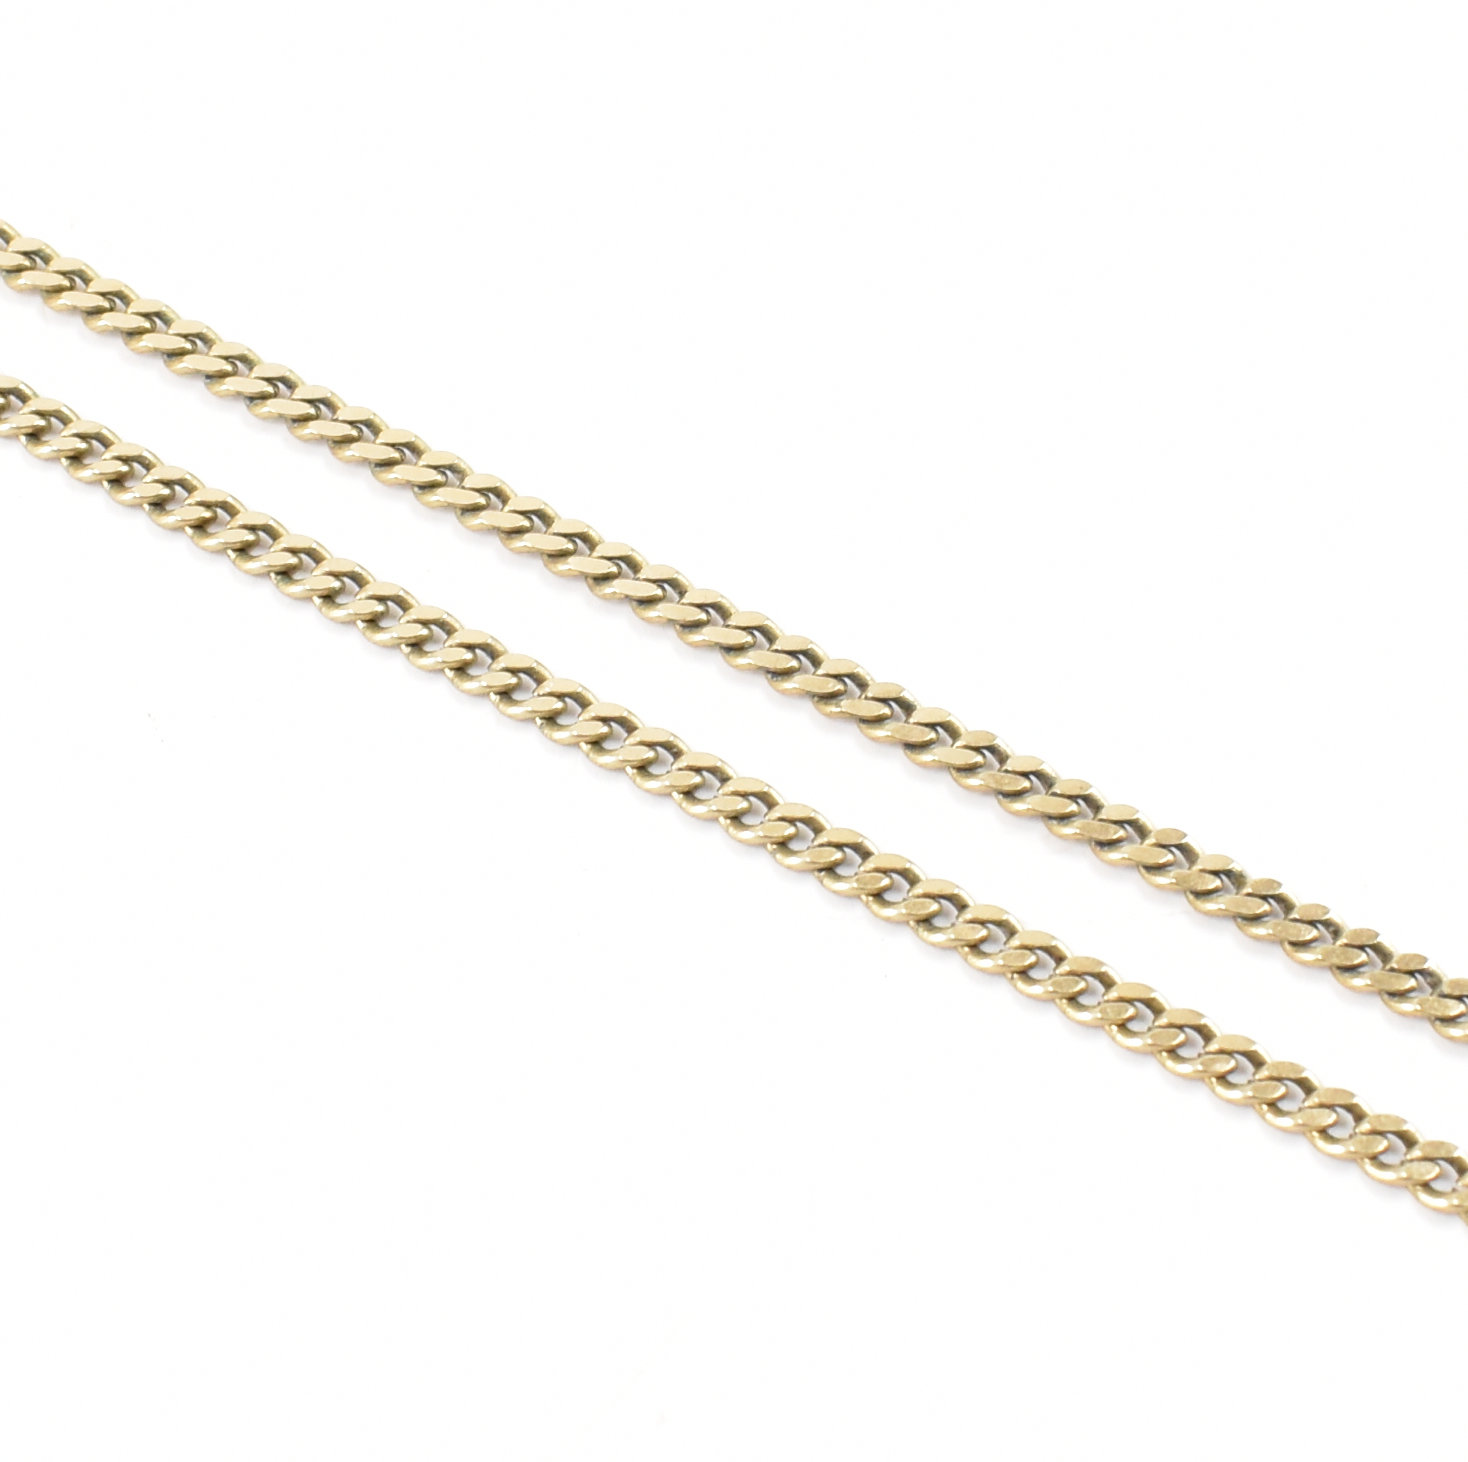 HALLMARKED 9CT GOLD CHAIN NECKLACE - Image 5 of 6